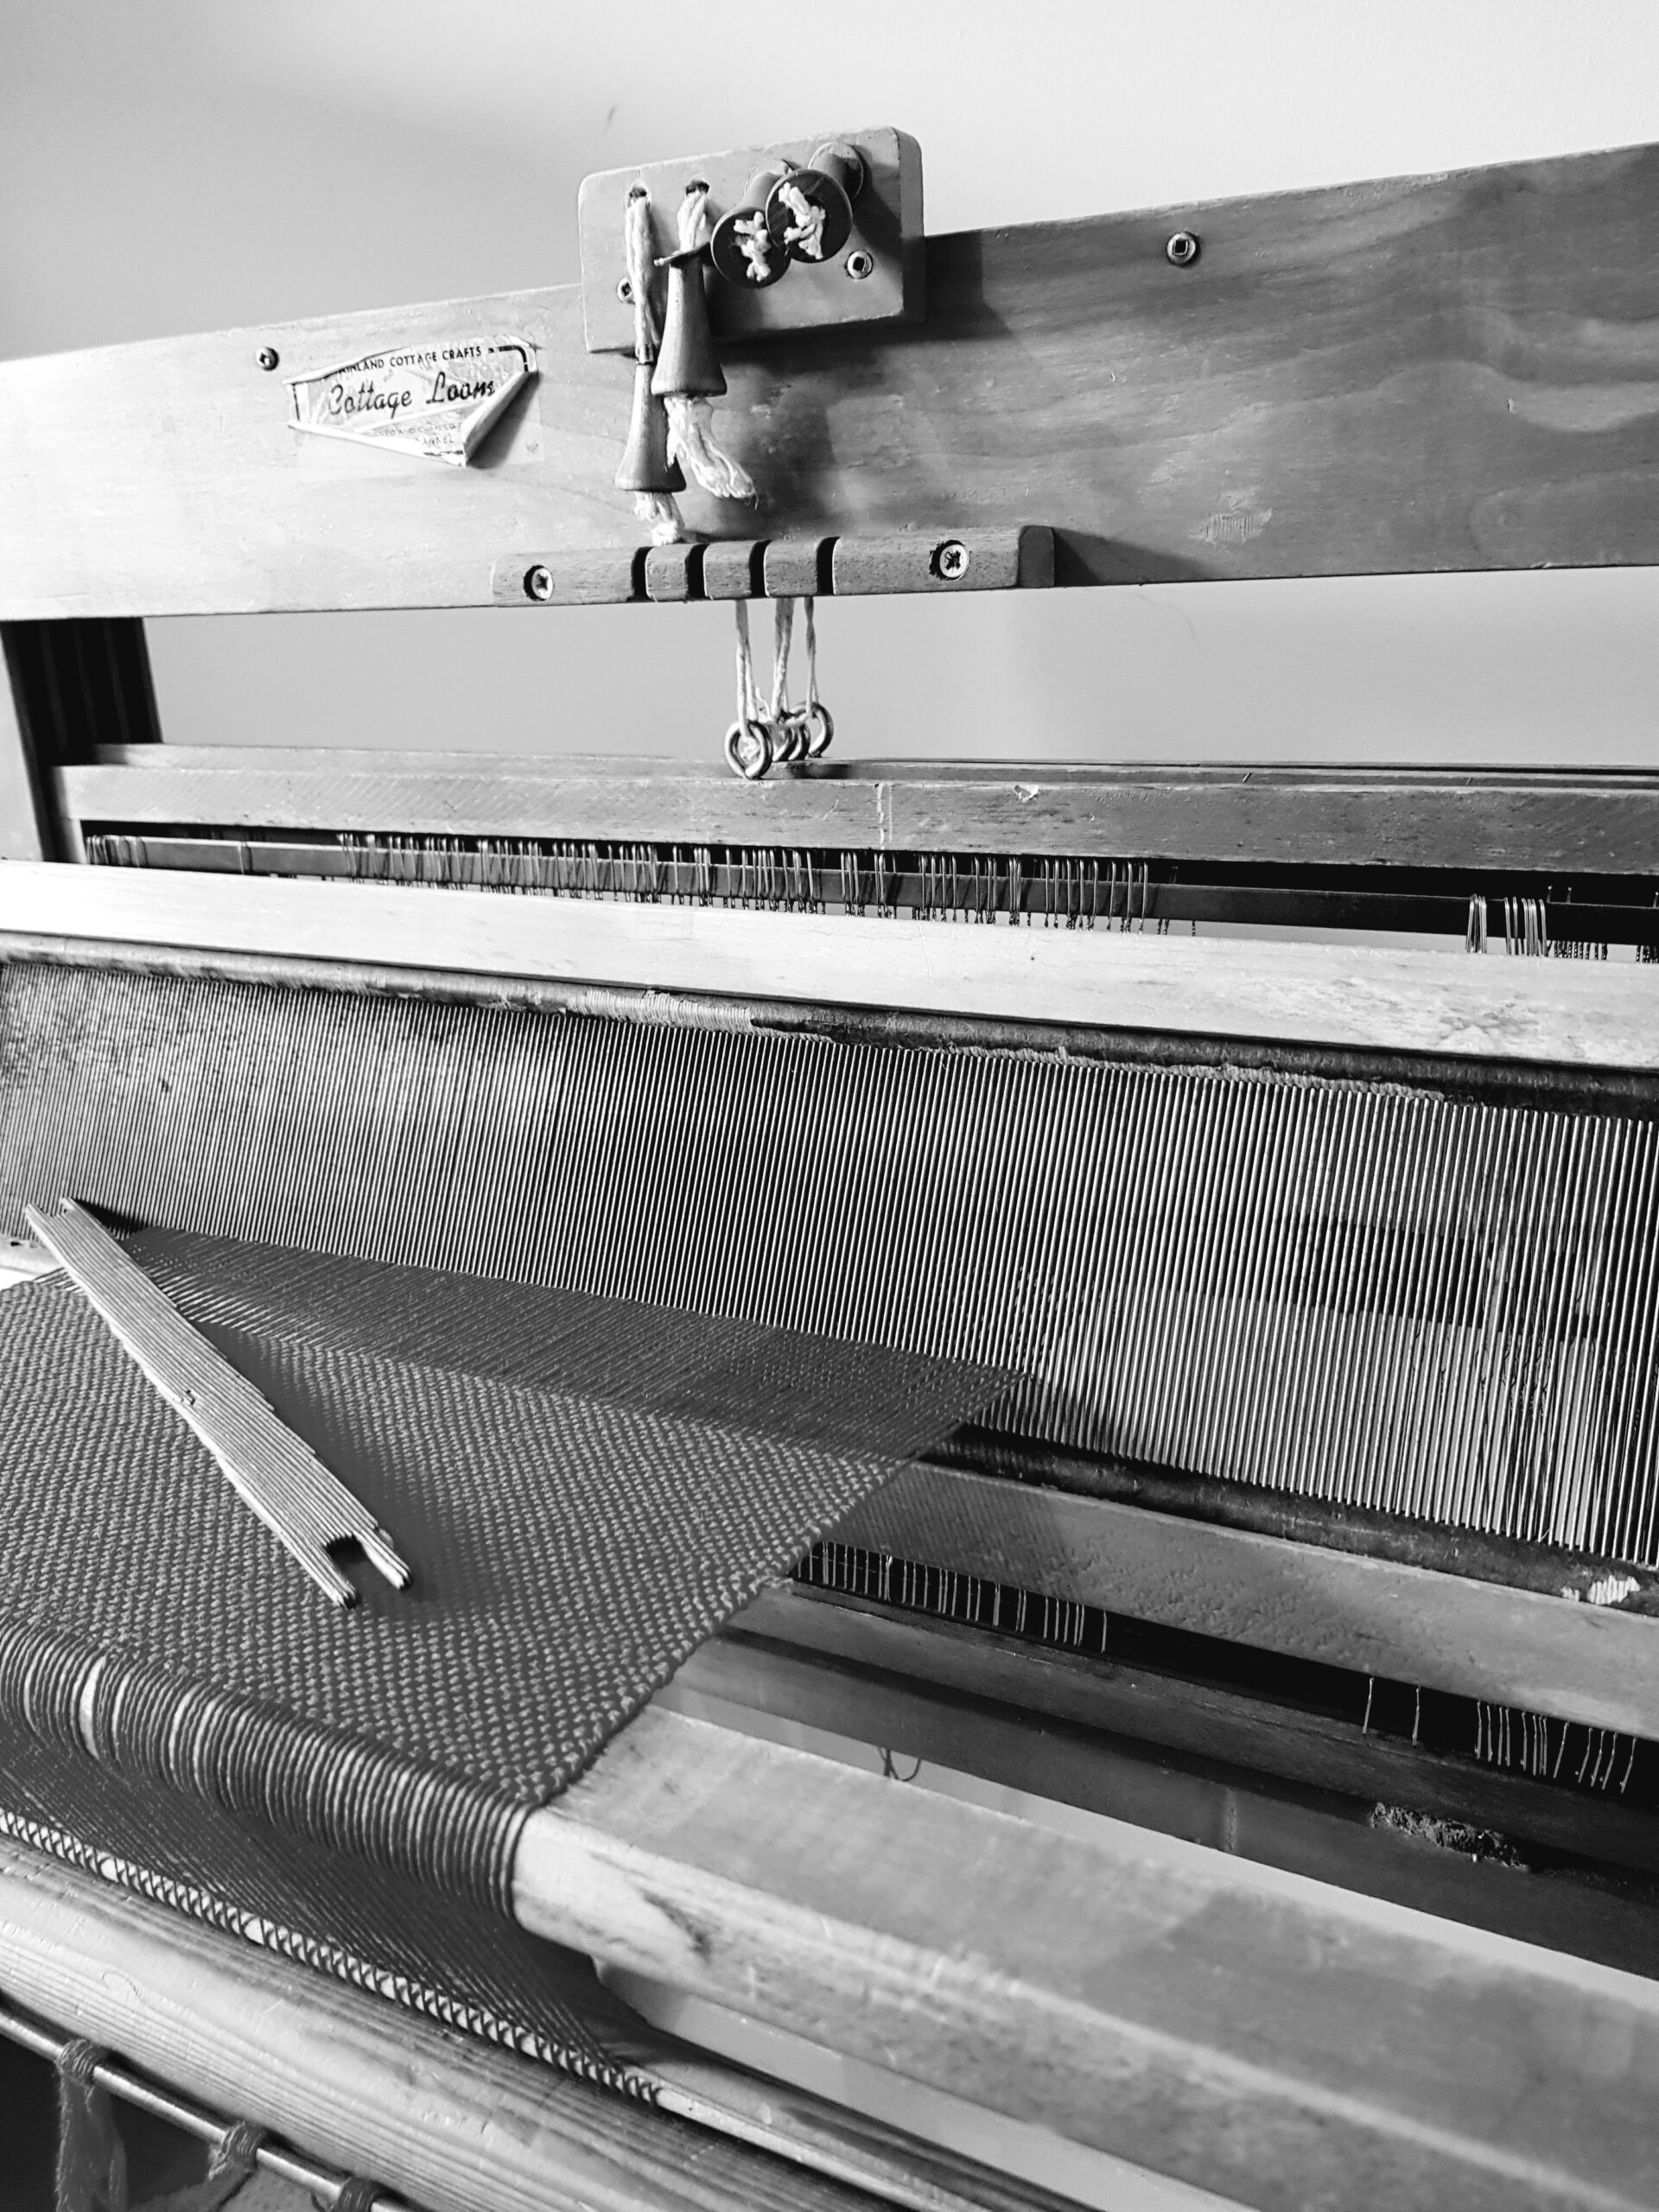 Table loom in black and white